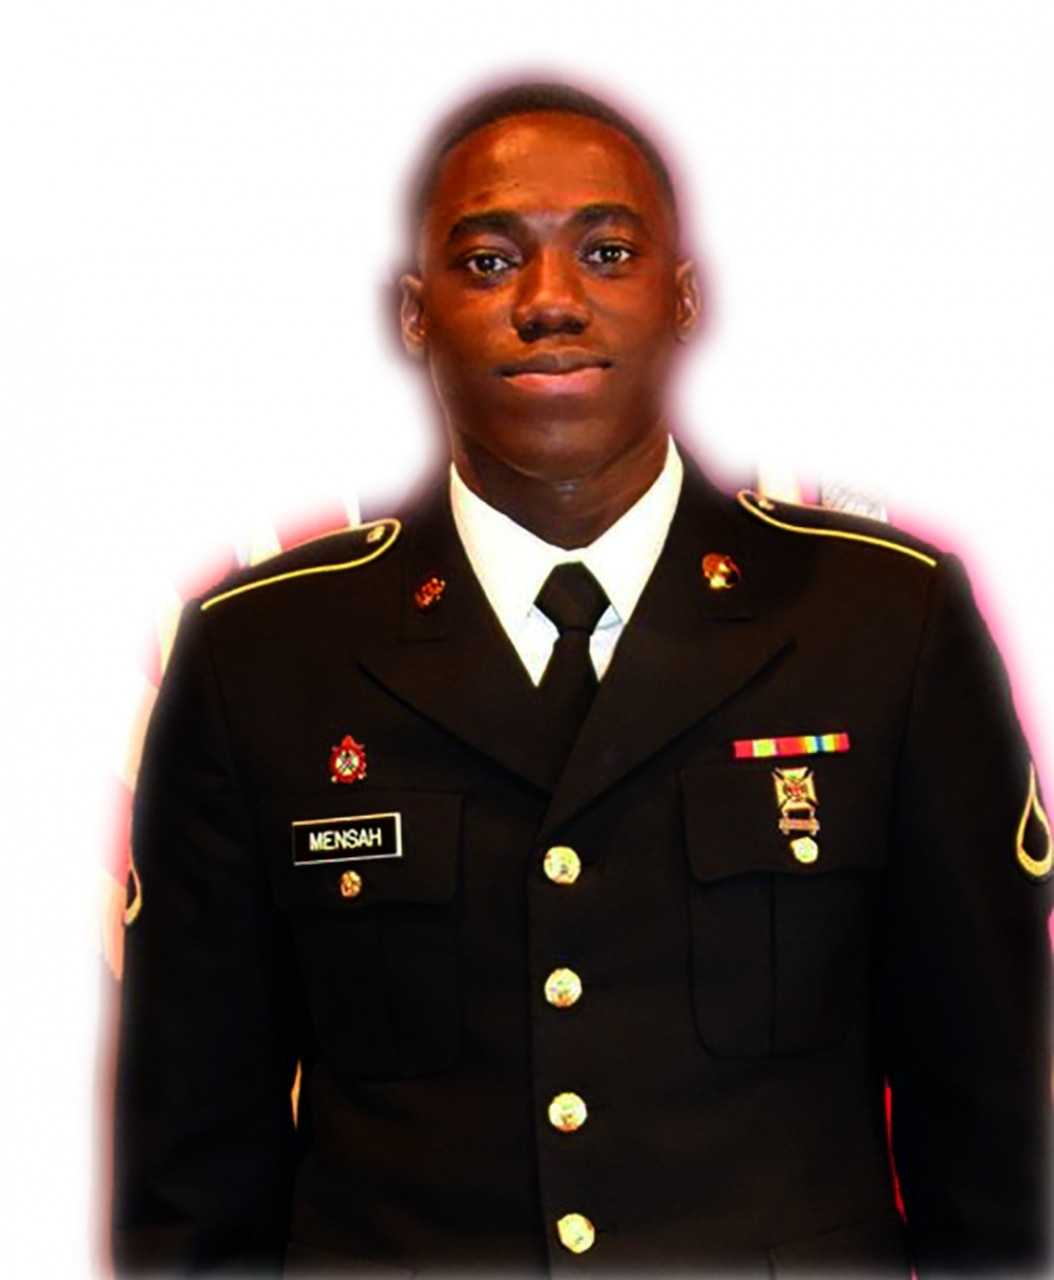 New York Army National Guard Pfc. Emmanuel Mensah died during a fire in an apartment building in the Bronx, New York City on Dec. 28, 2017. Mensah died while seeking to save other residents of his apartment building. Mensah is believed to have saved four people before he died in the fire, which killed 12 people. New York Army National Guard Recruiting and Retention Battalion courtesy photo